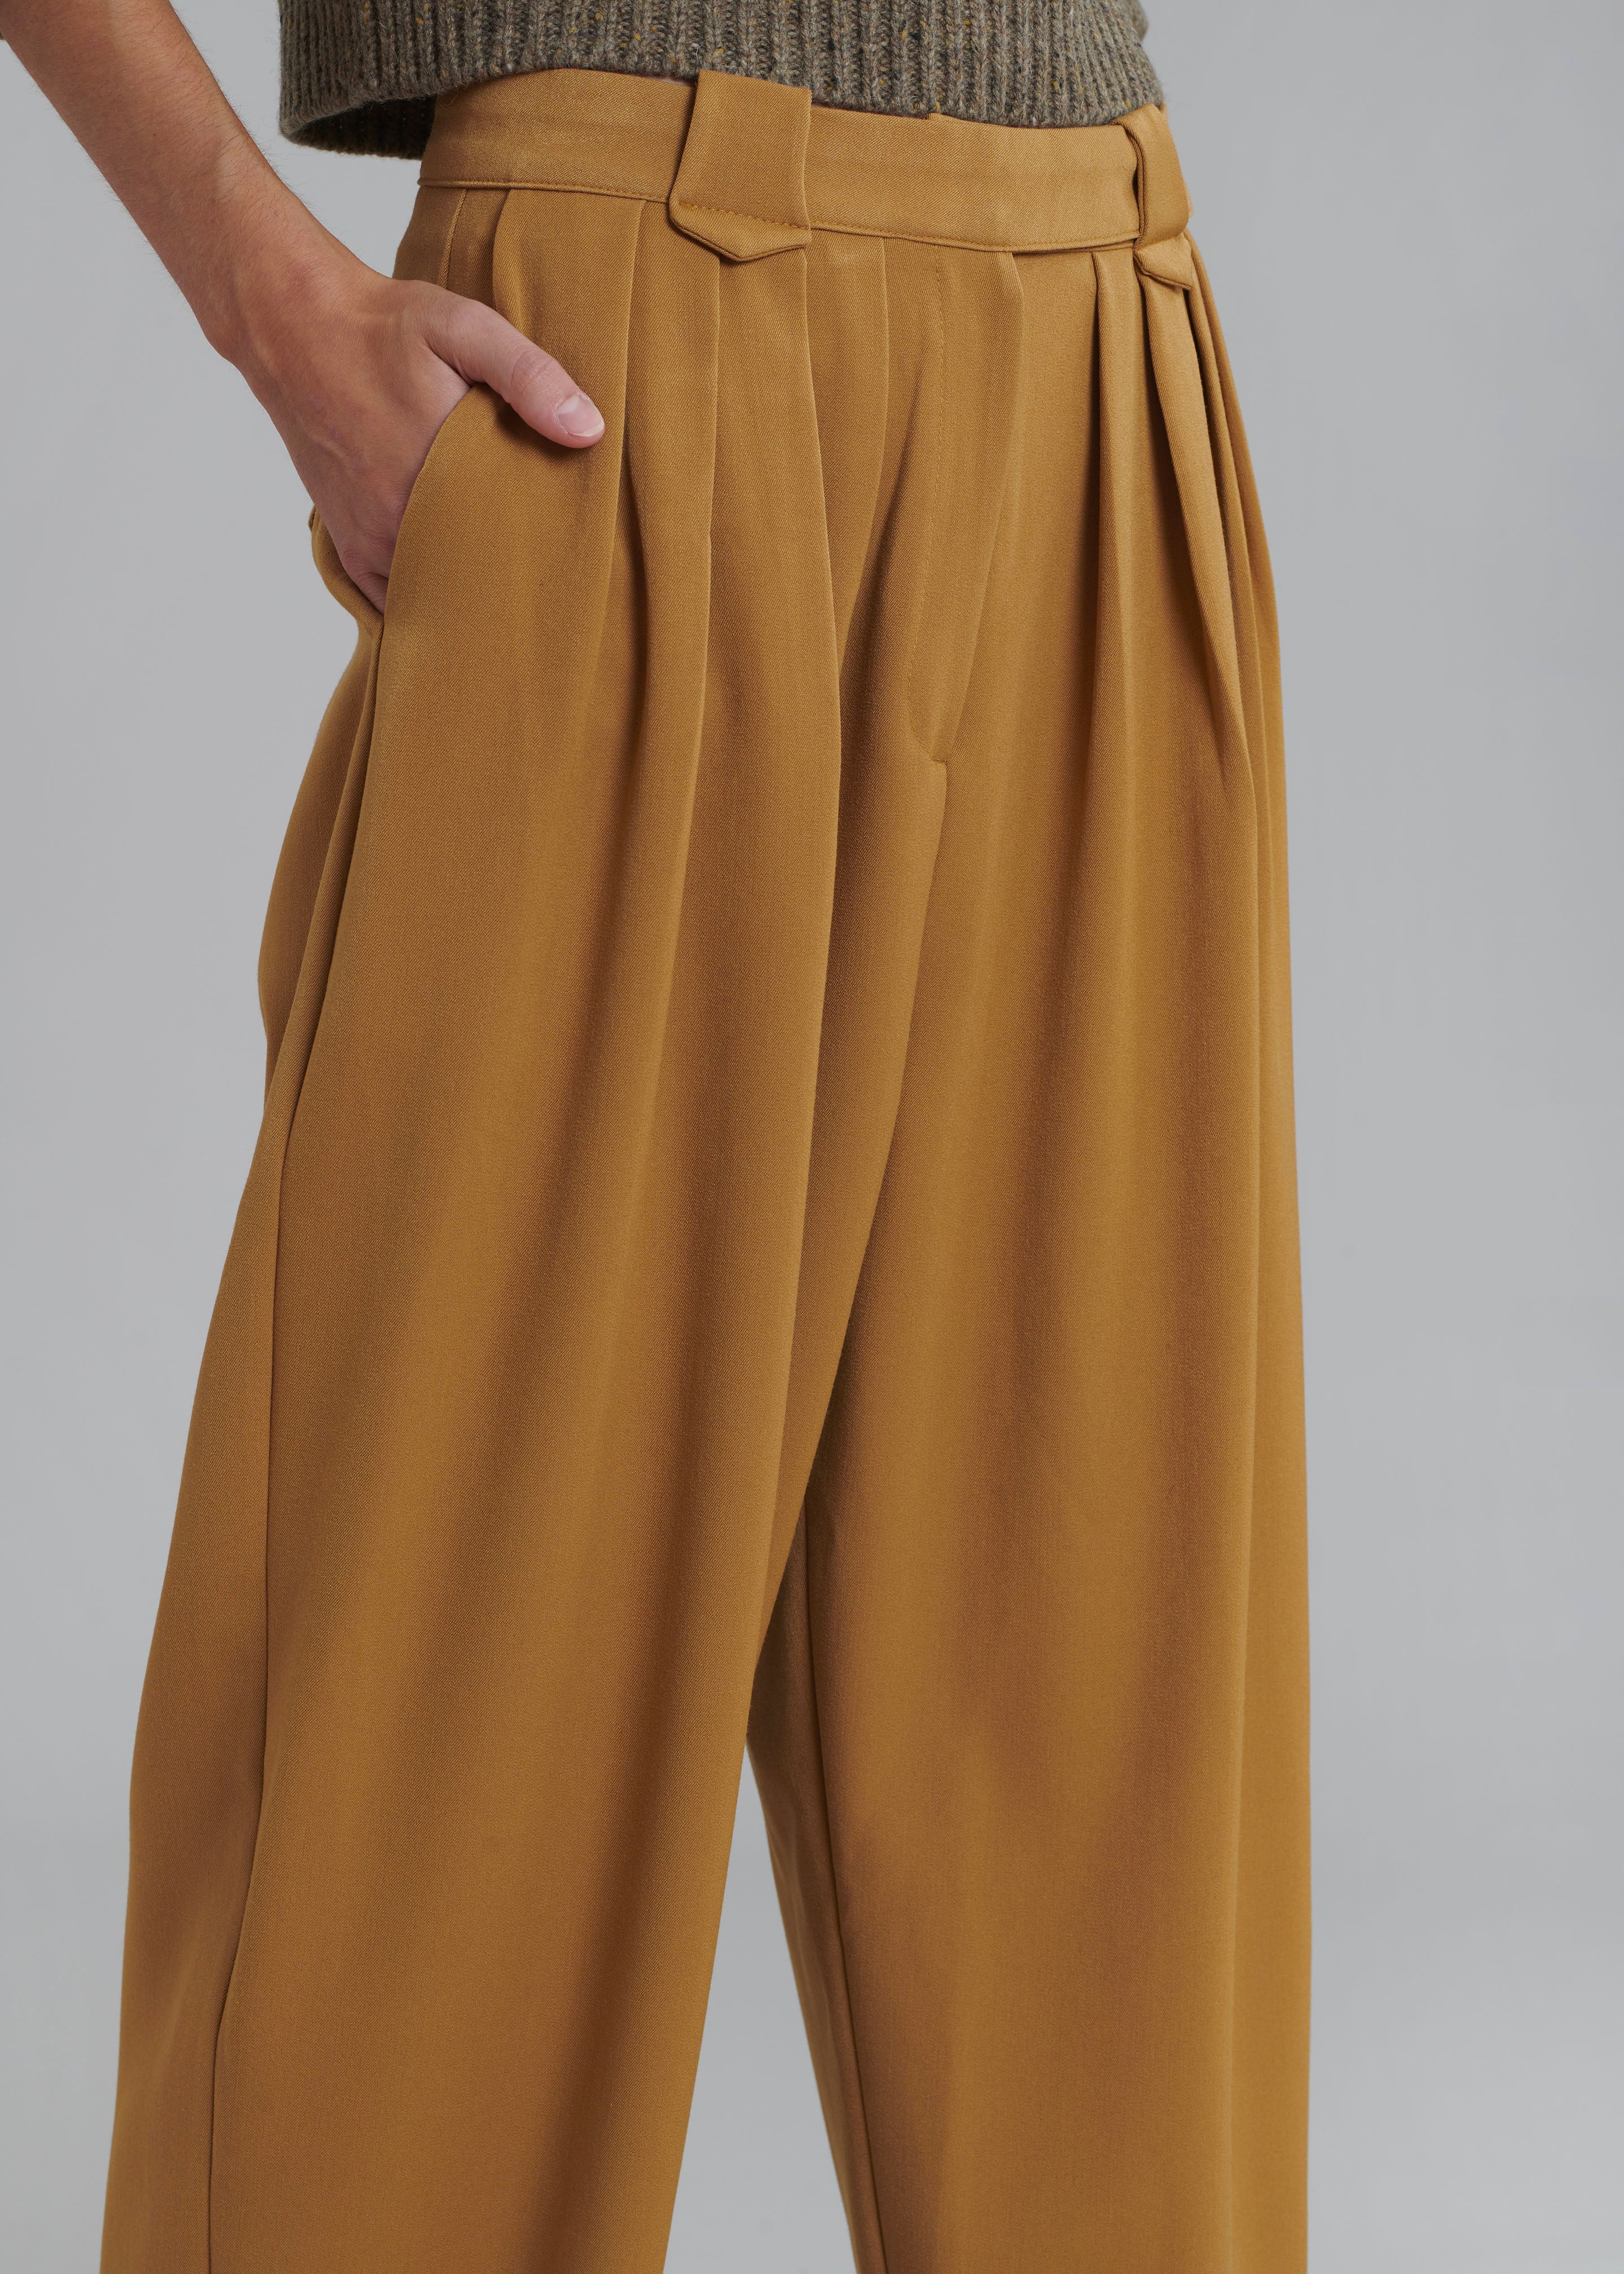 Luce Pleated Pants - Ginger - 3